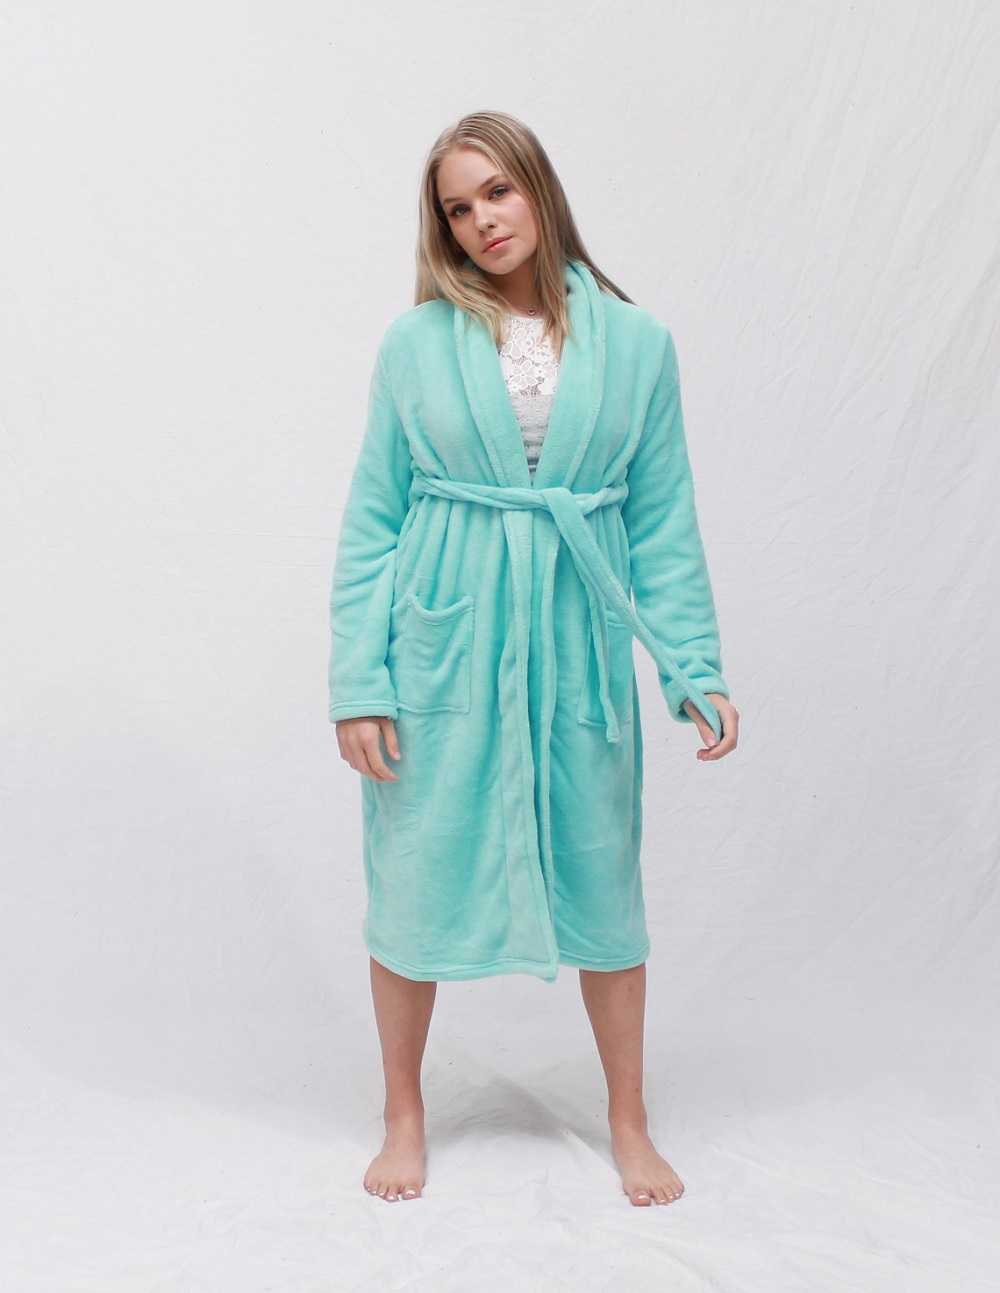 Kids Fleece, Plush, Soft and Warm Hooded Bathrobe for Girls, Made in T –  www.towel.com